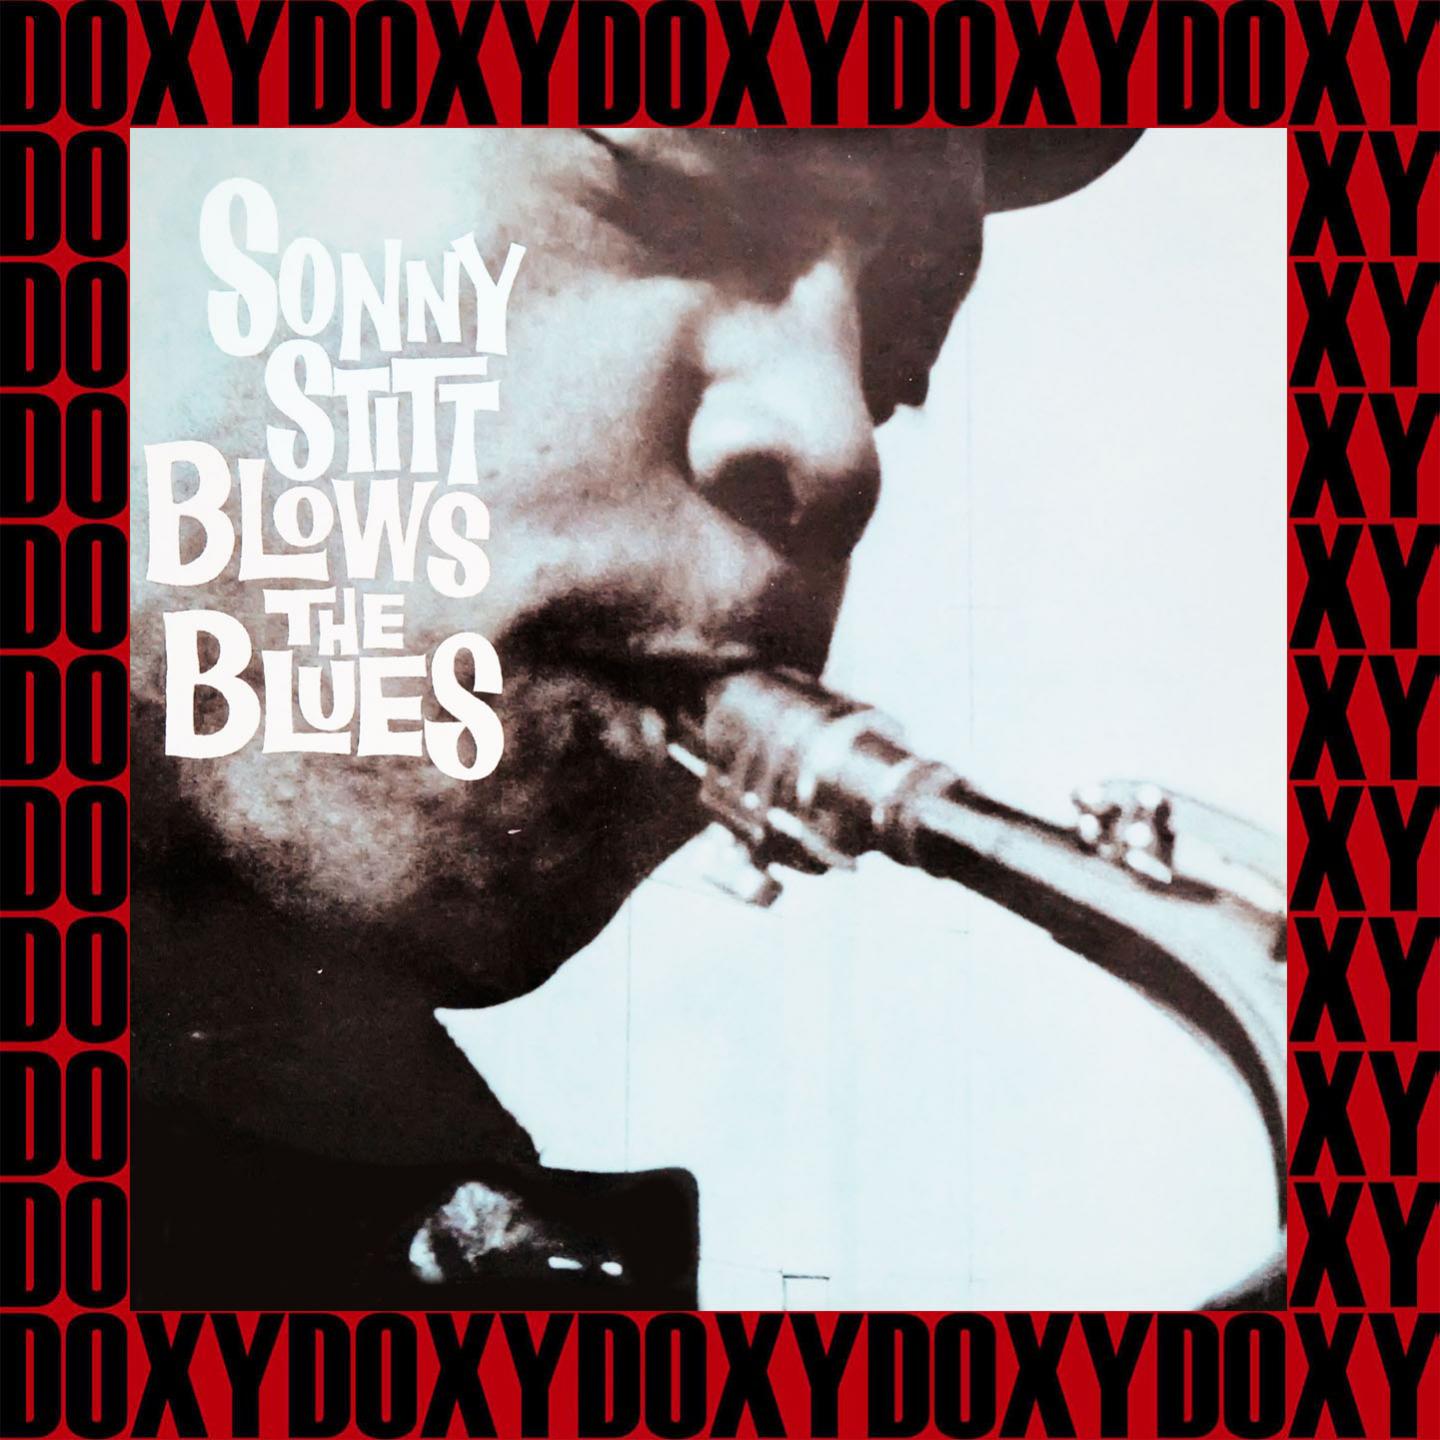 Sonny Stitt Blows The Blues (Remastered Version) (Doxy Collection)